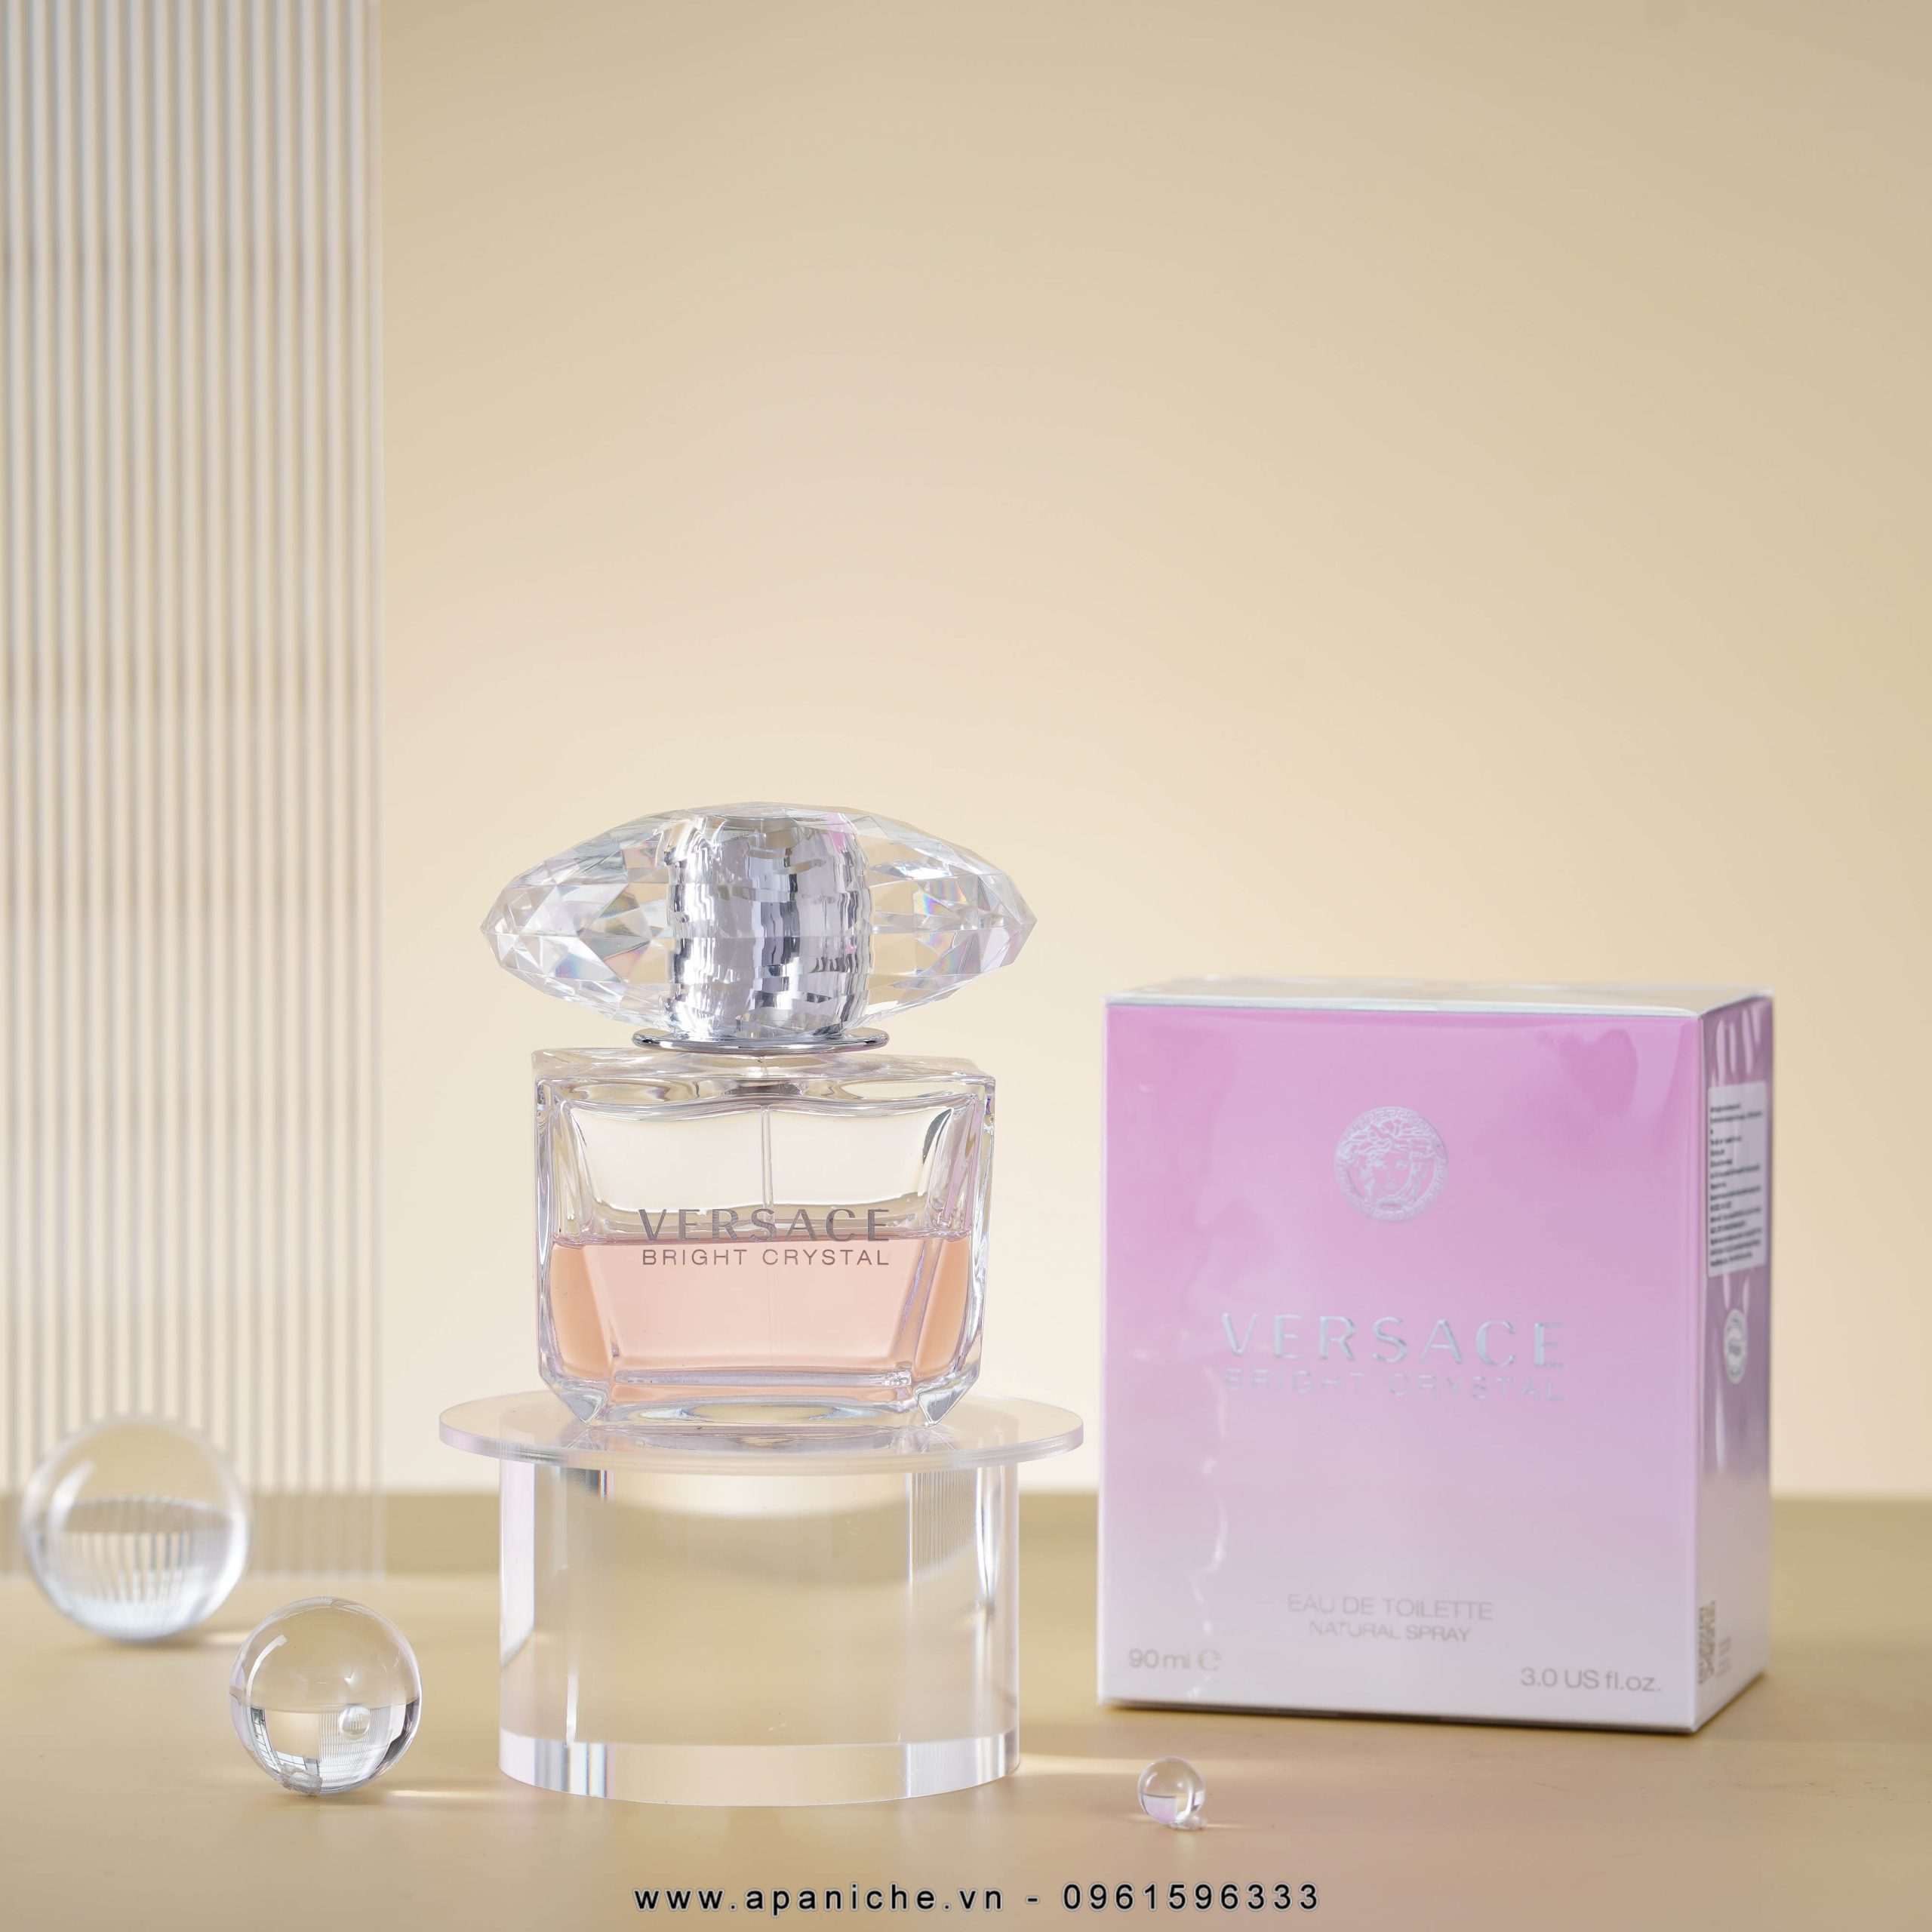 Versace-Bright-Crystal-EDT-gia-tot-nhat